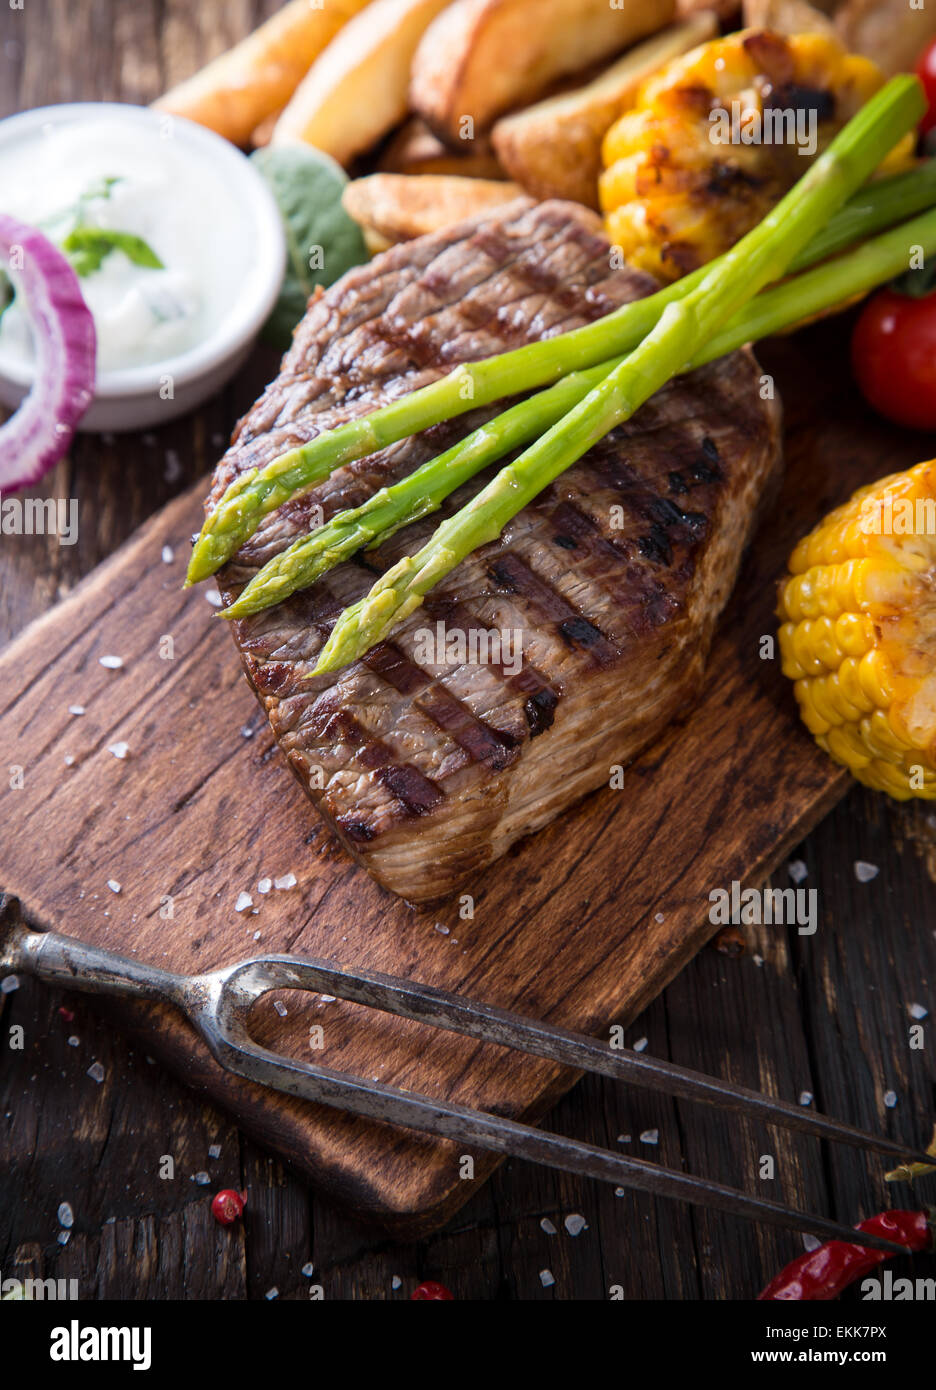 Delicious beef steak on wooden table, close-up Stock Photo